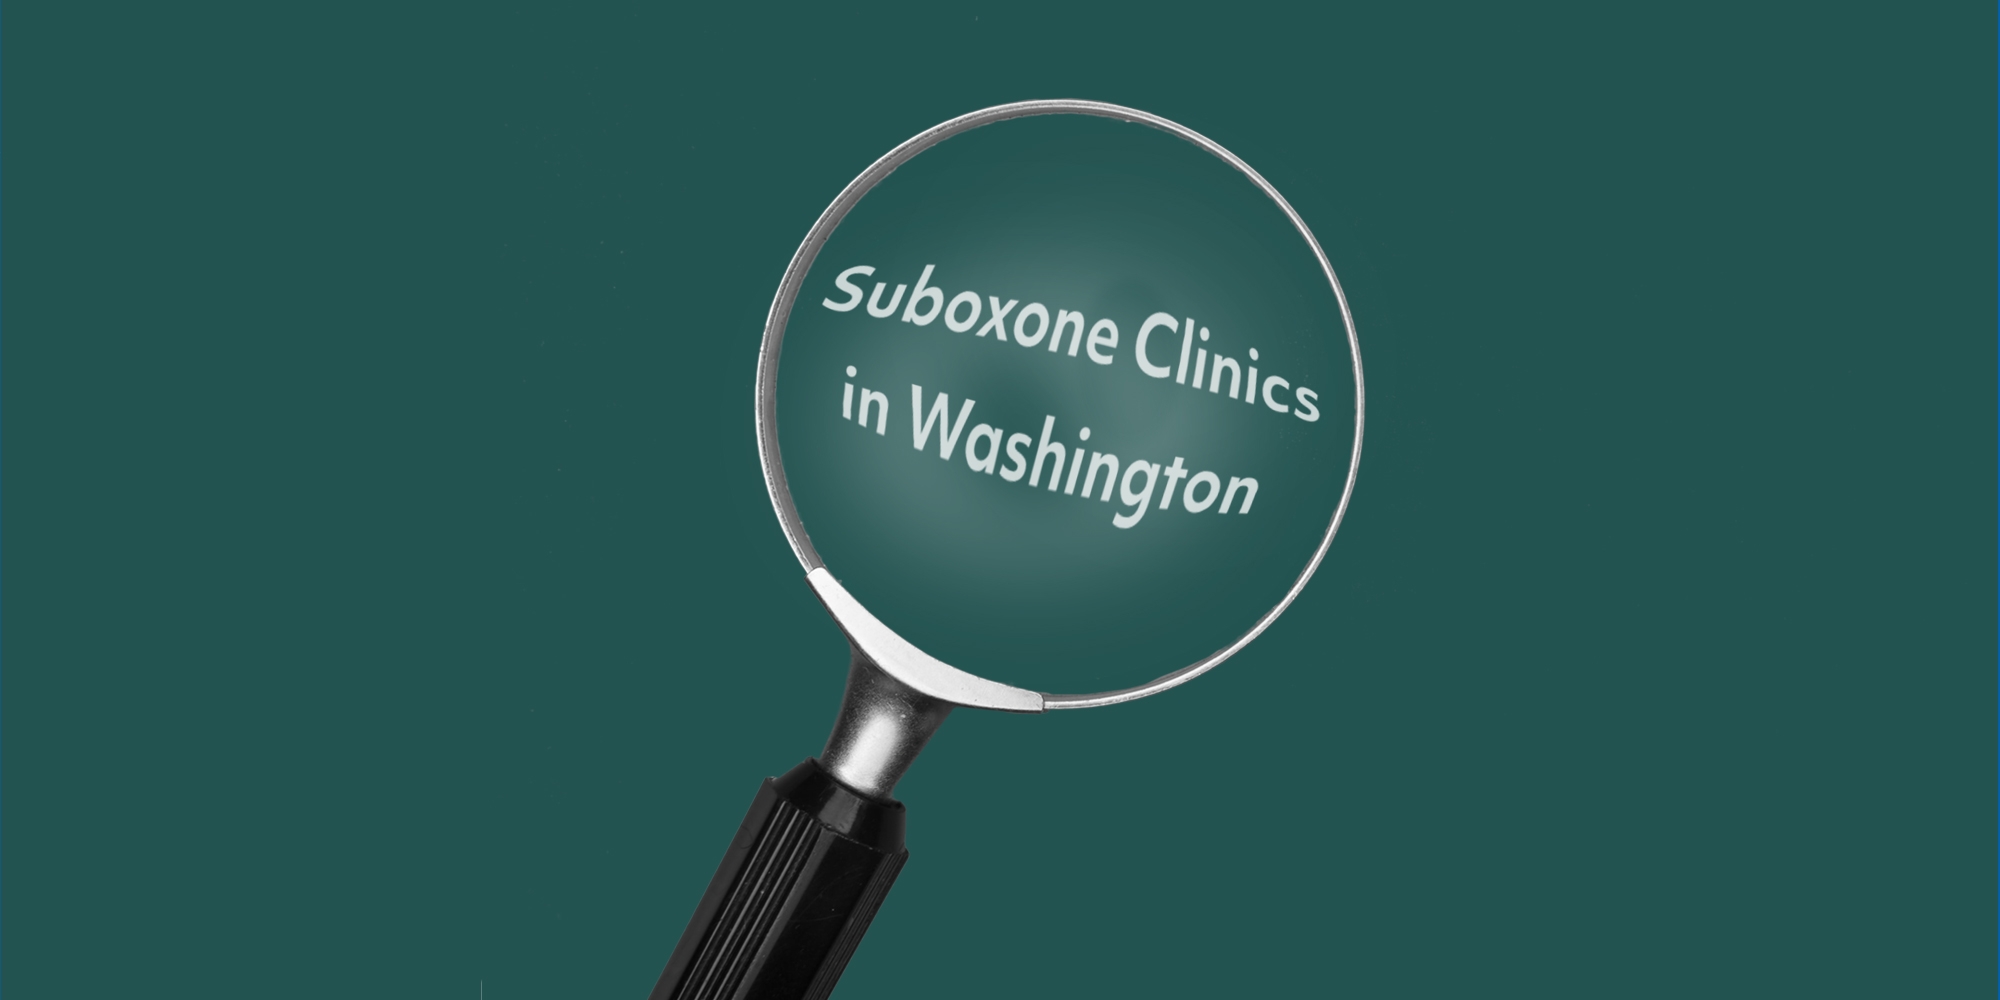 Magnifying glass over the words "Suboxone Clinics in Washington"